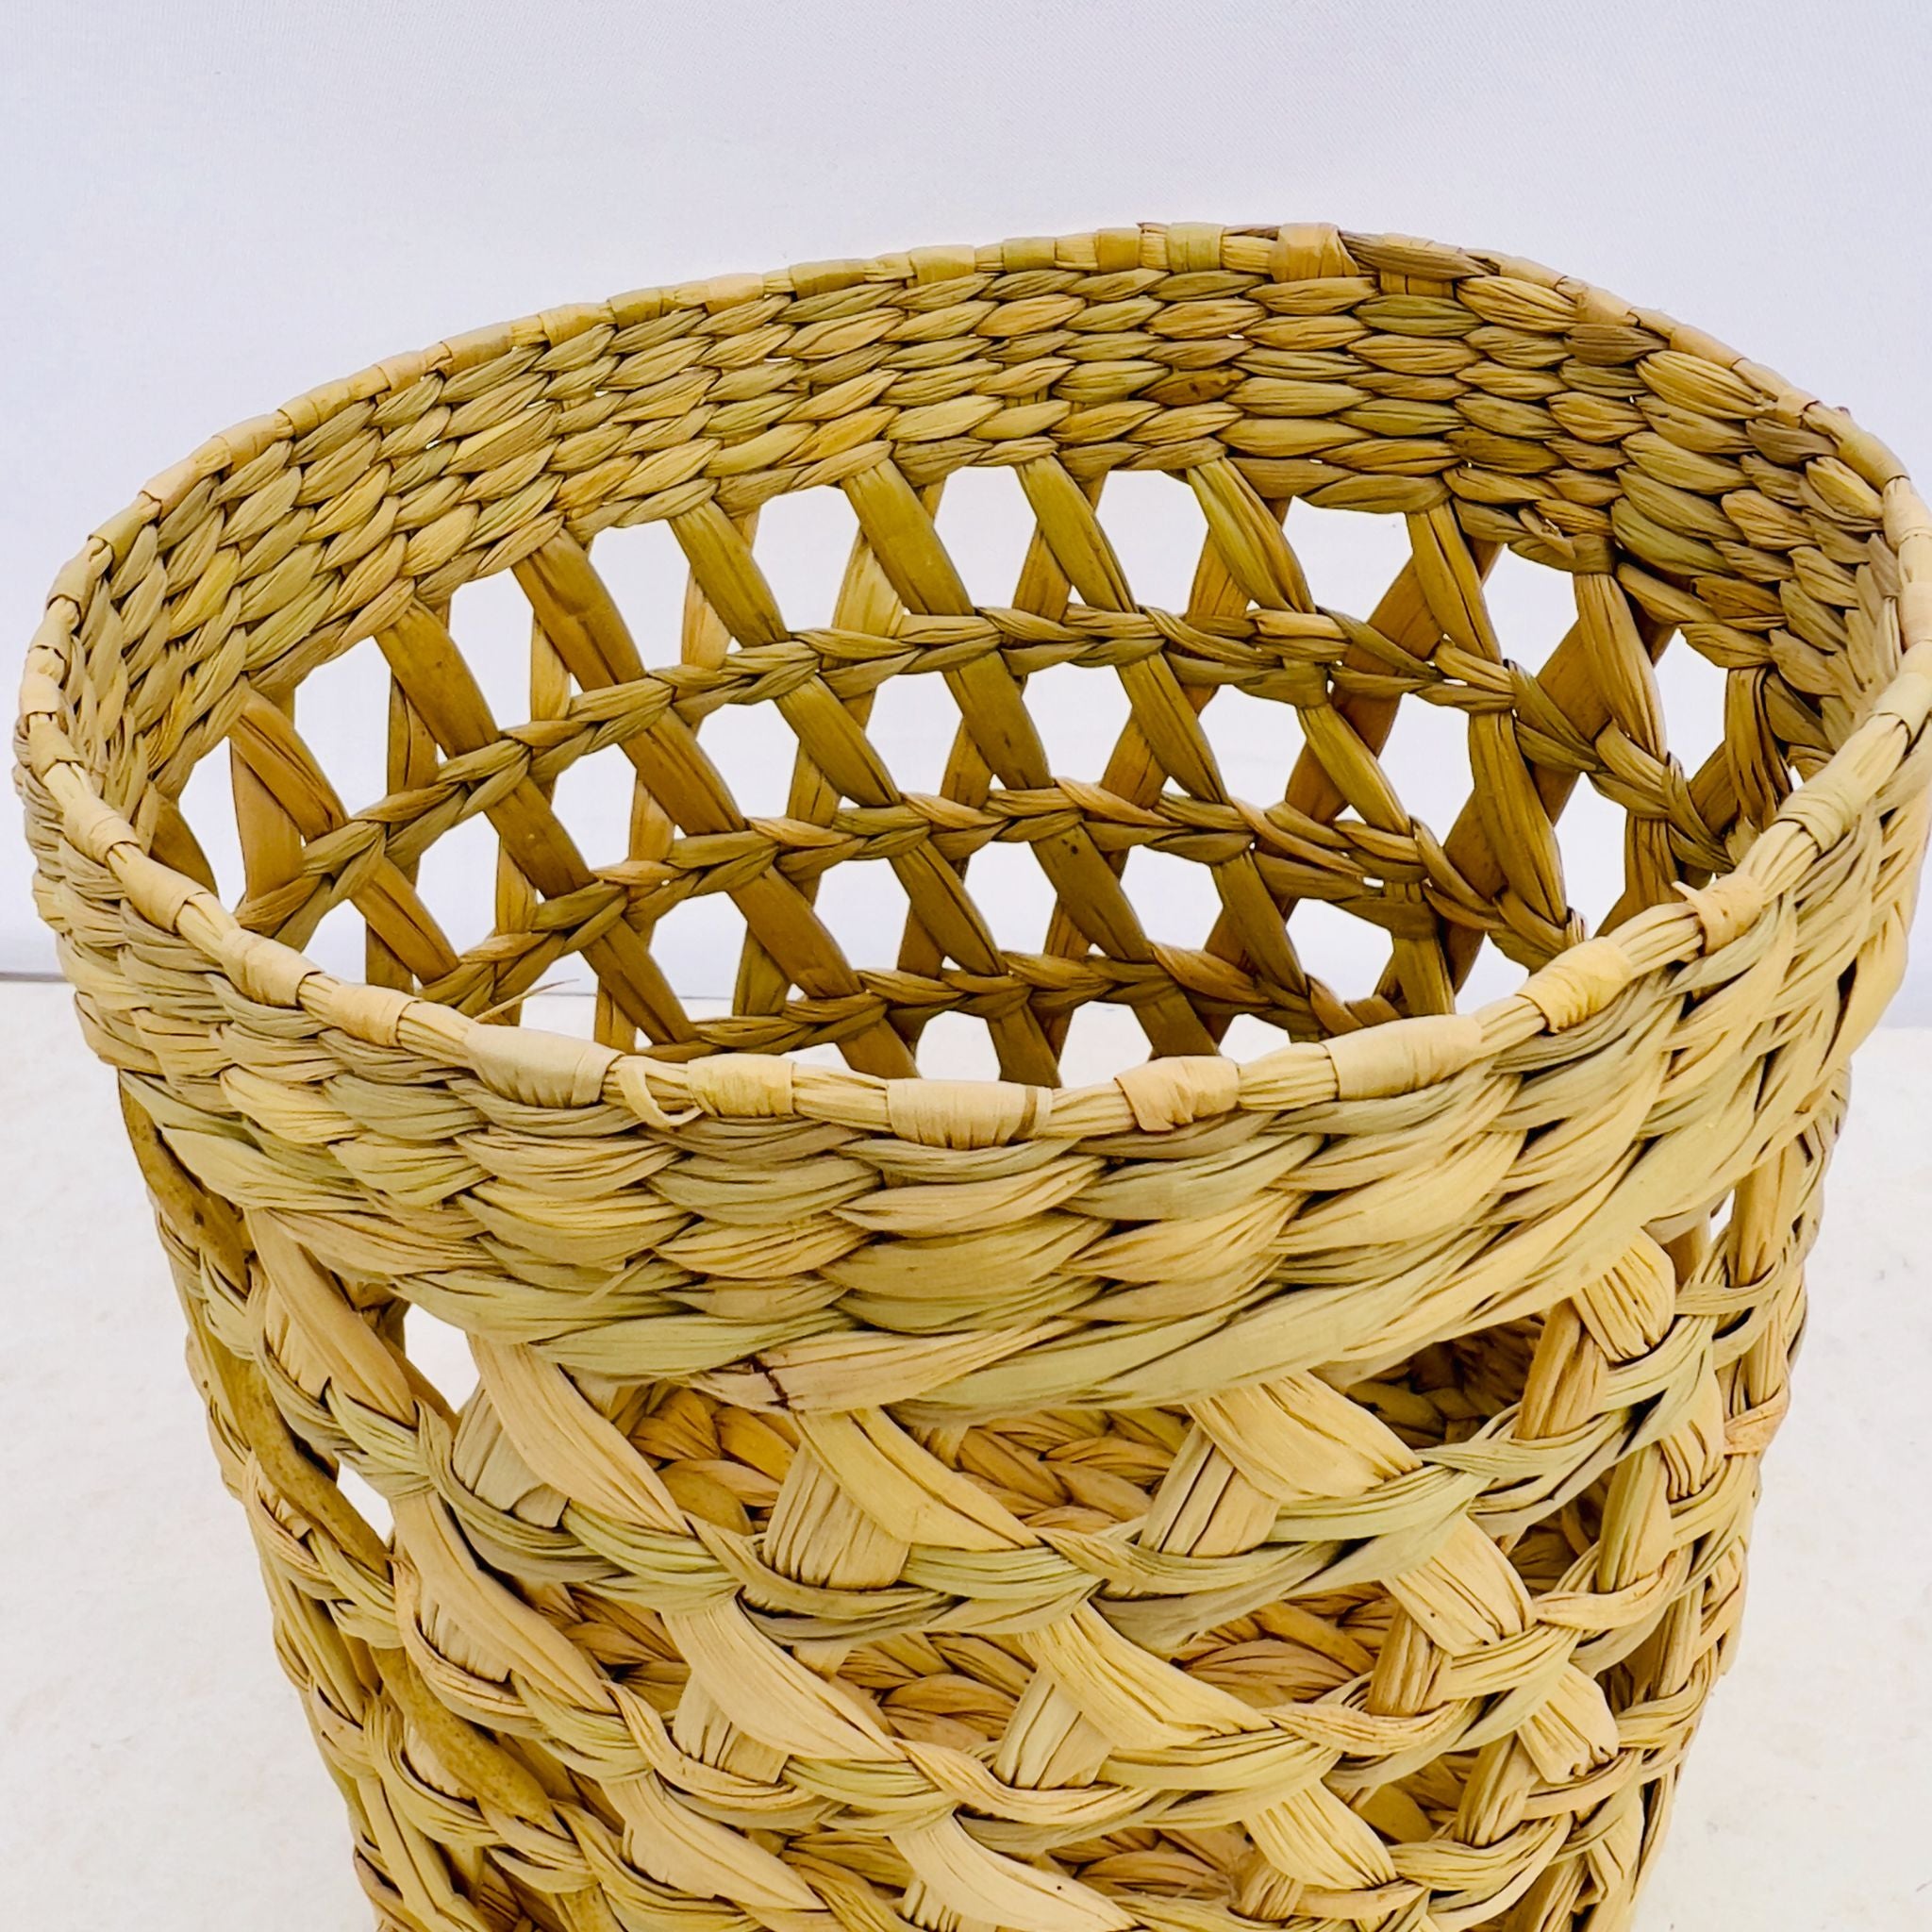 Grouping of traditional weaving from northeastern India. Open weave basket.